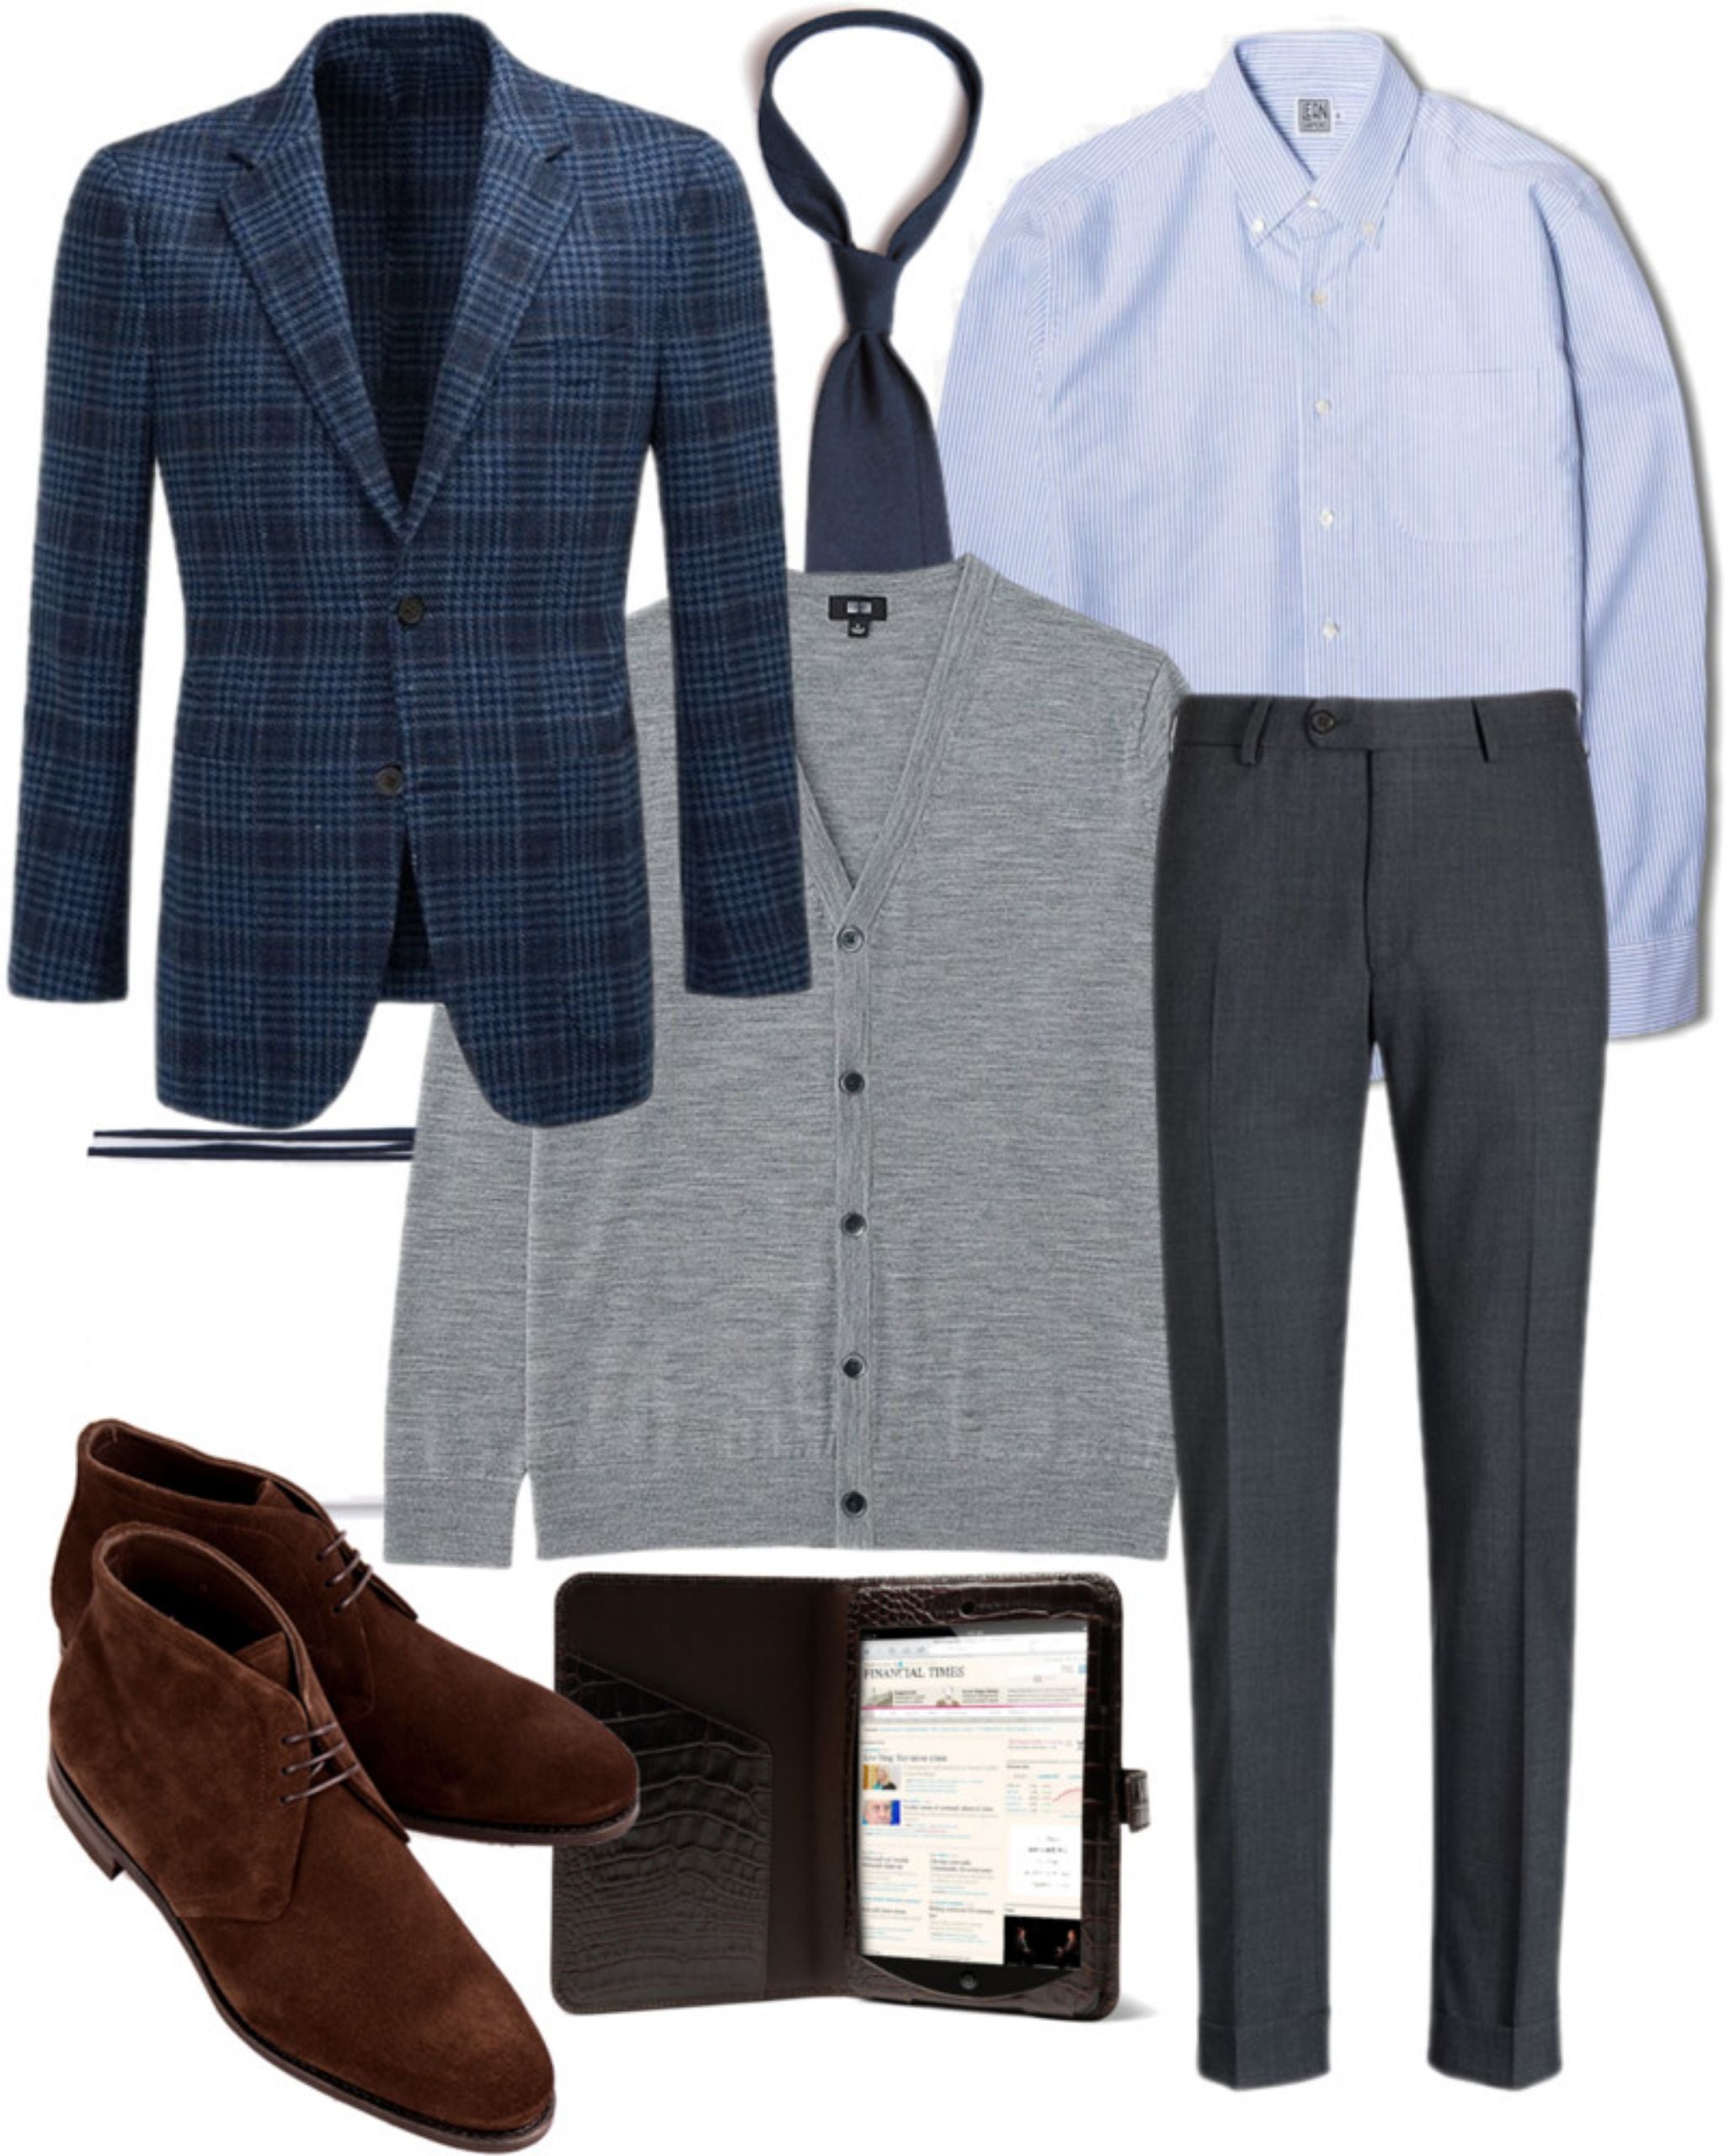 Fall inspiration for student sport coat and layering